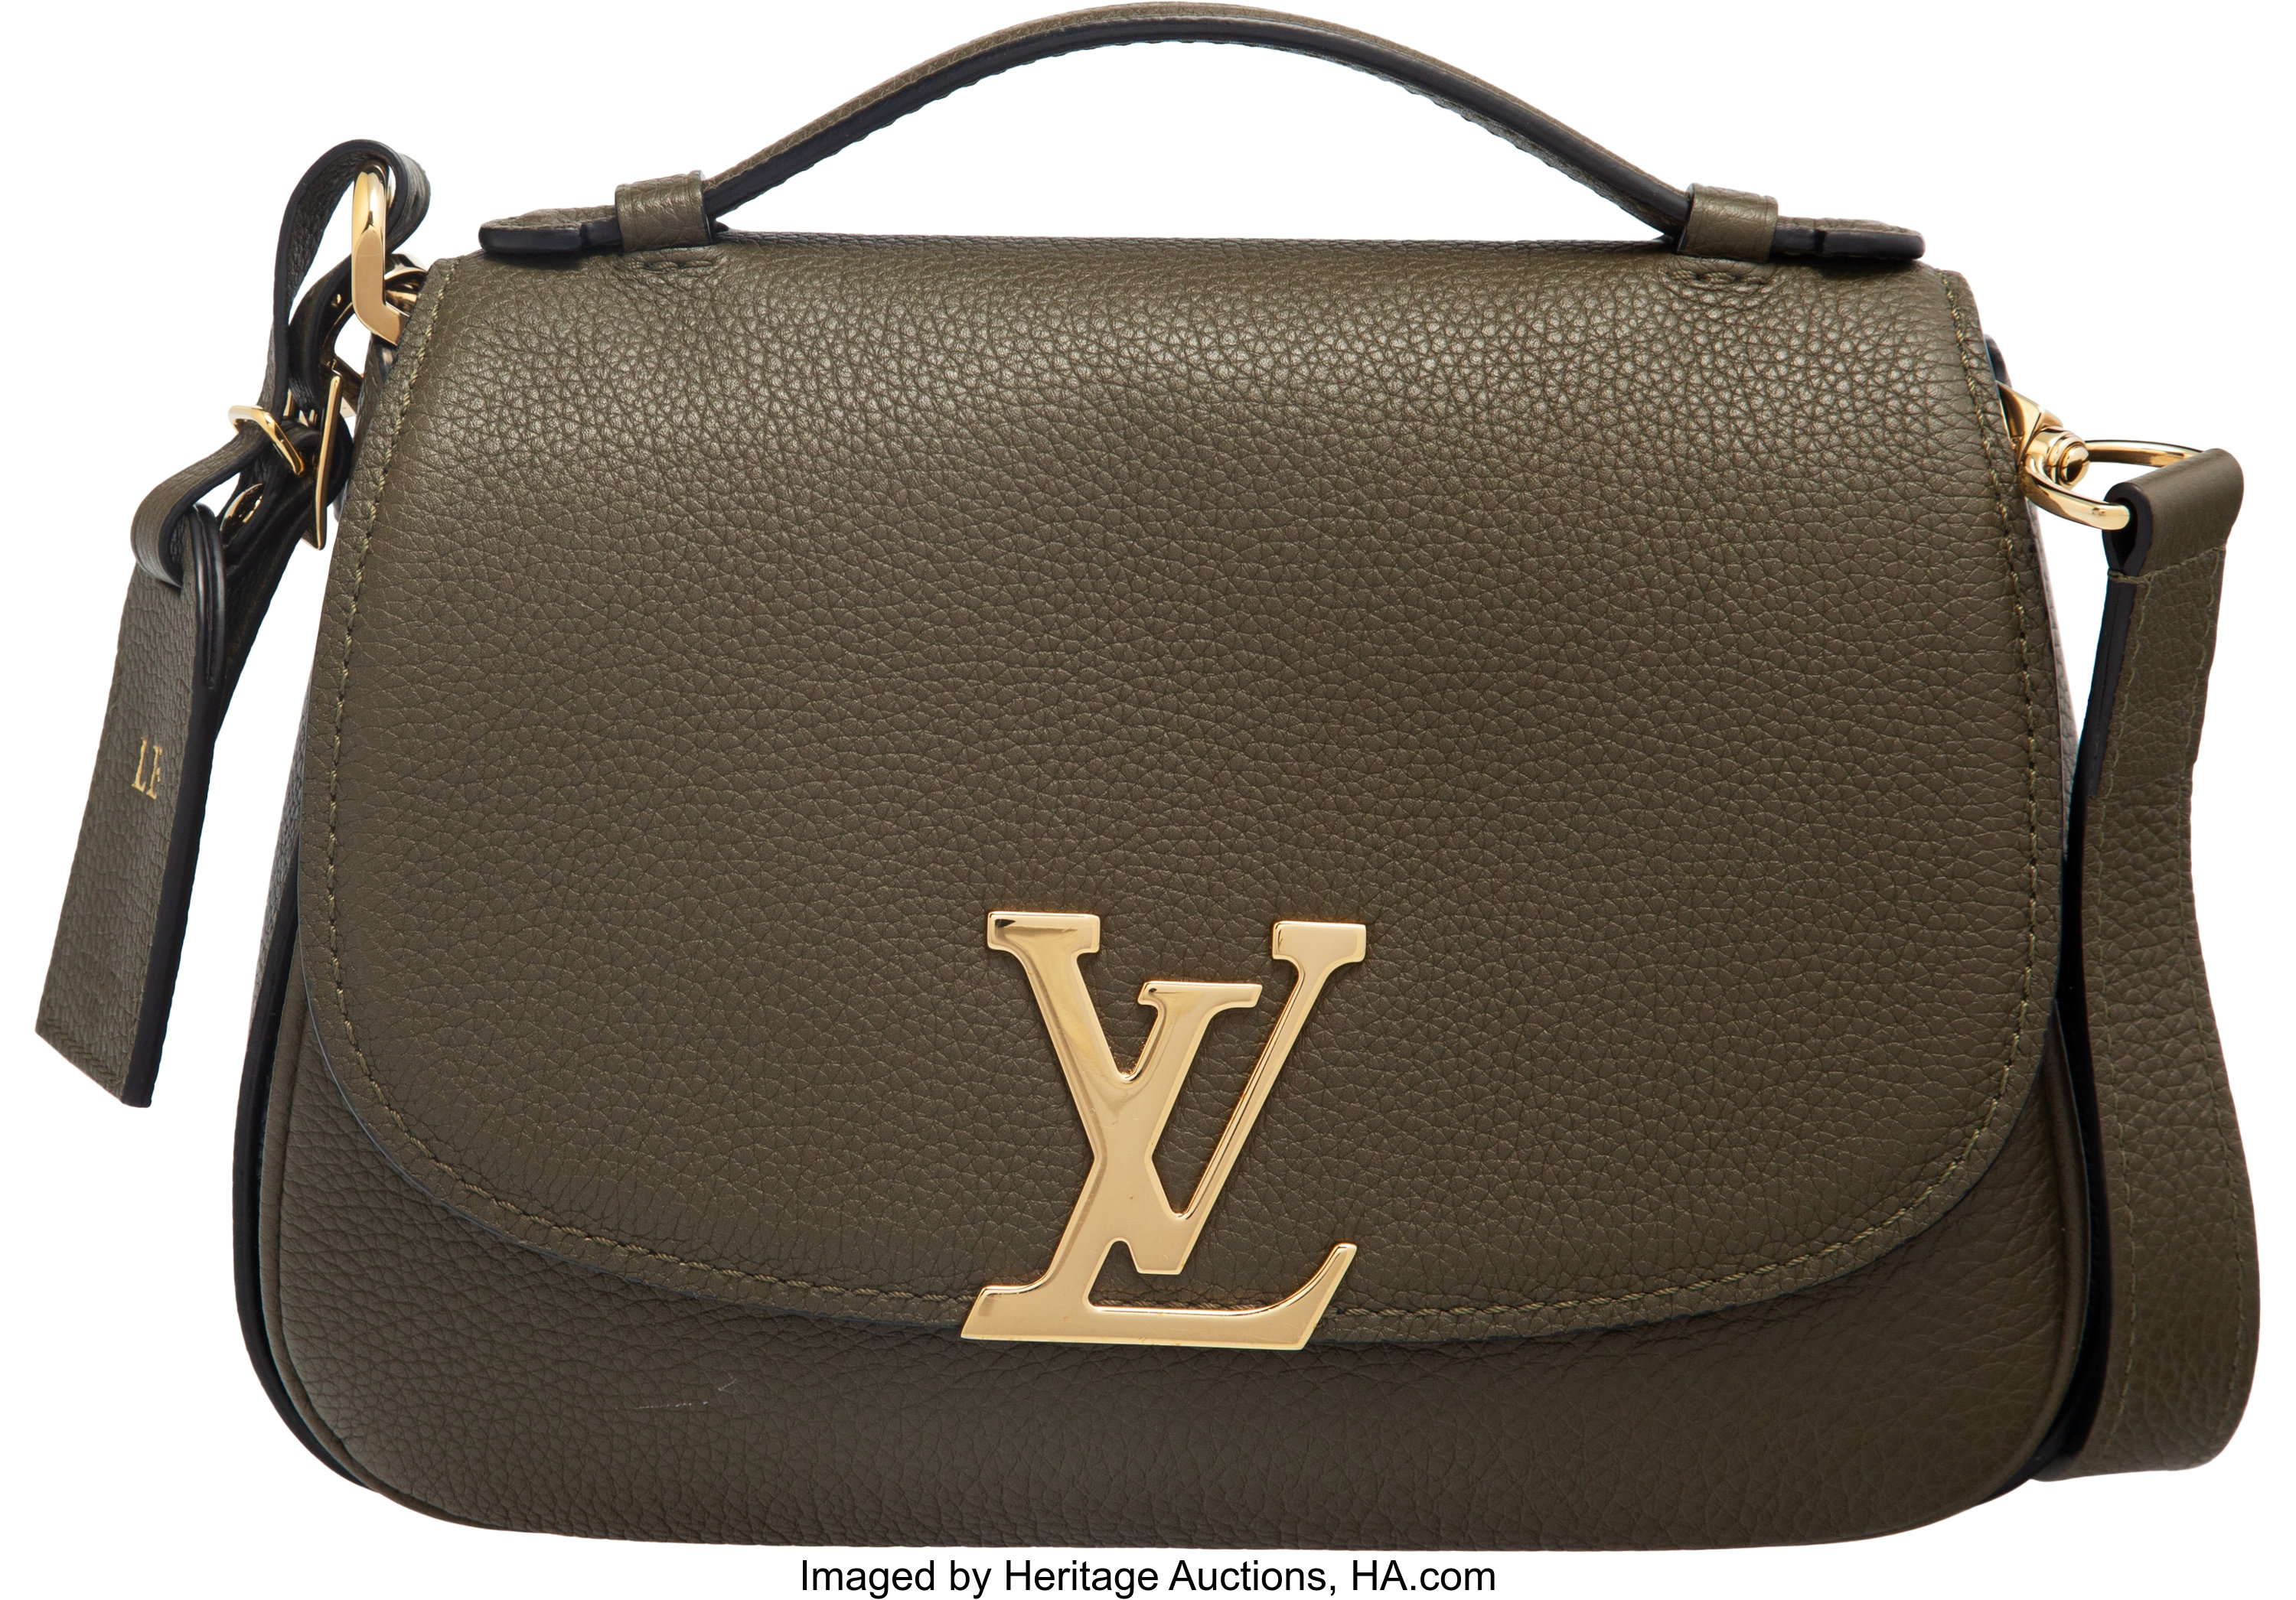 Louis Vuitton Olive Green Leather Vivienne Bag with Gold Hardware., Lot  #15192